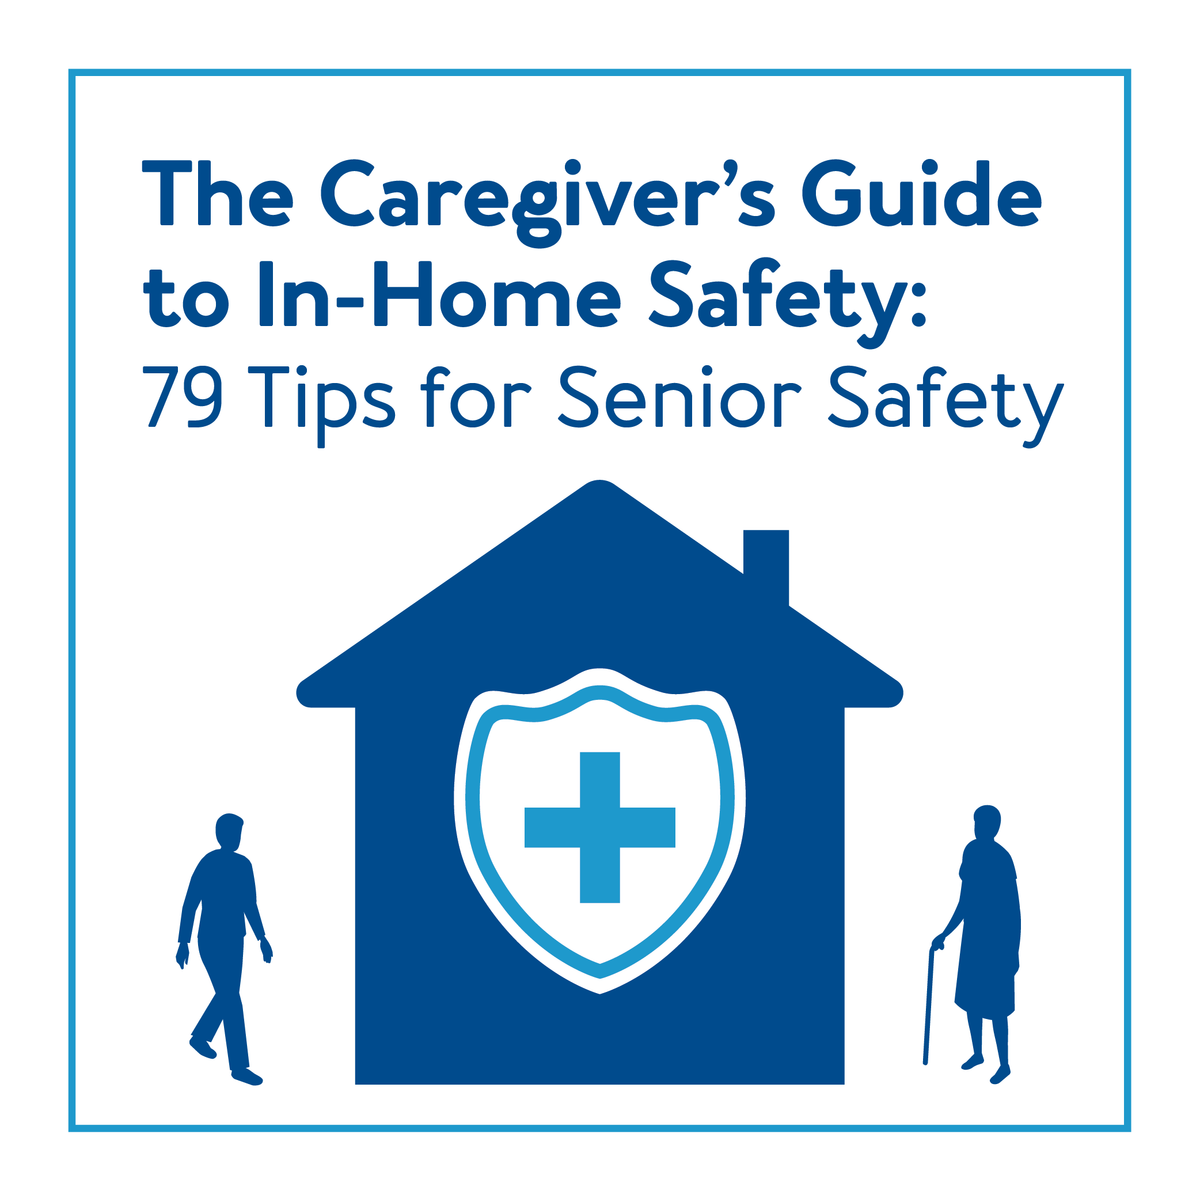 The Caregiver's Guide to In-Home Safety